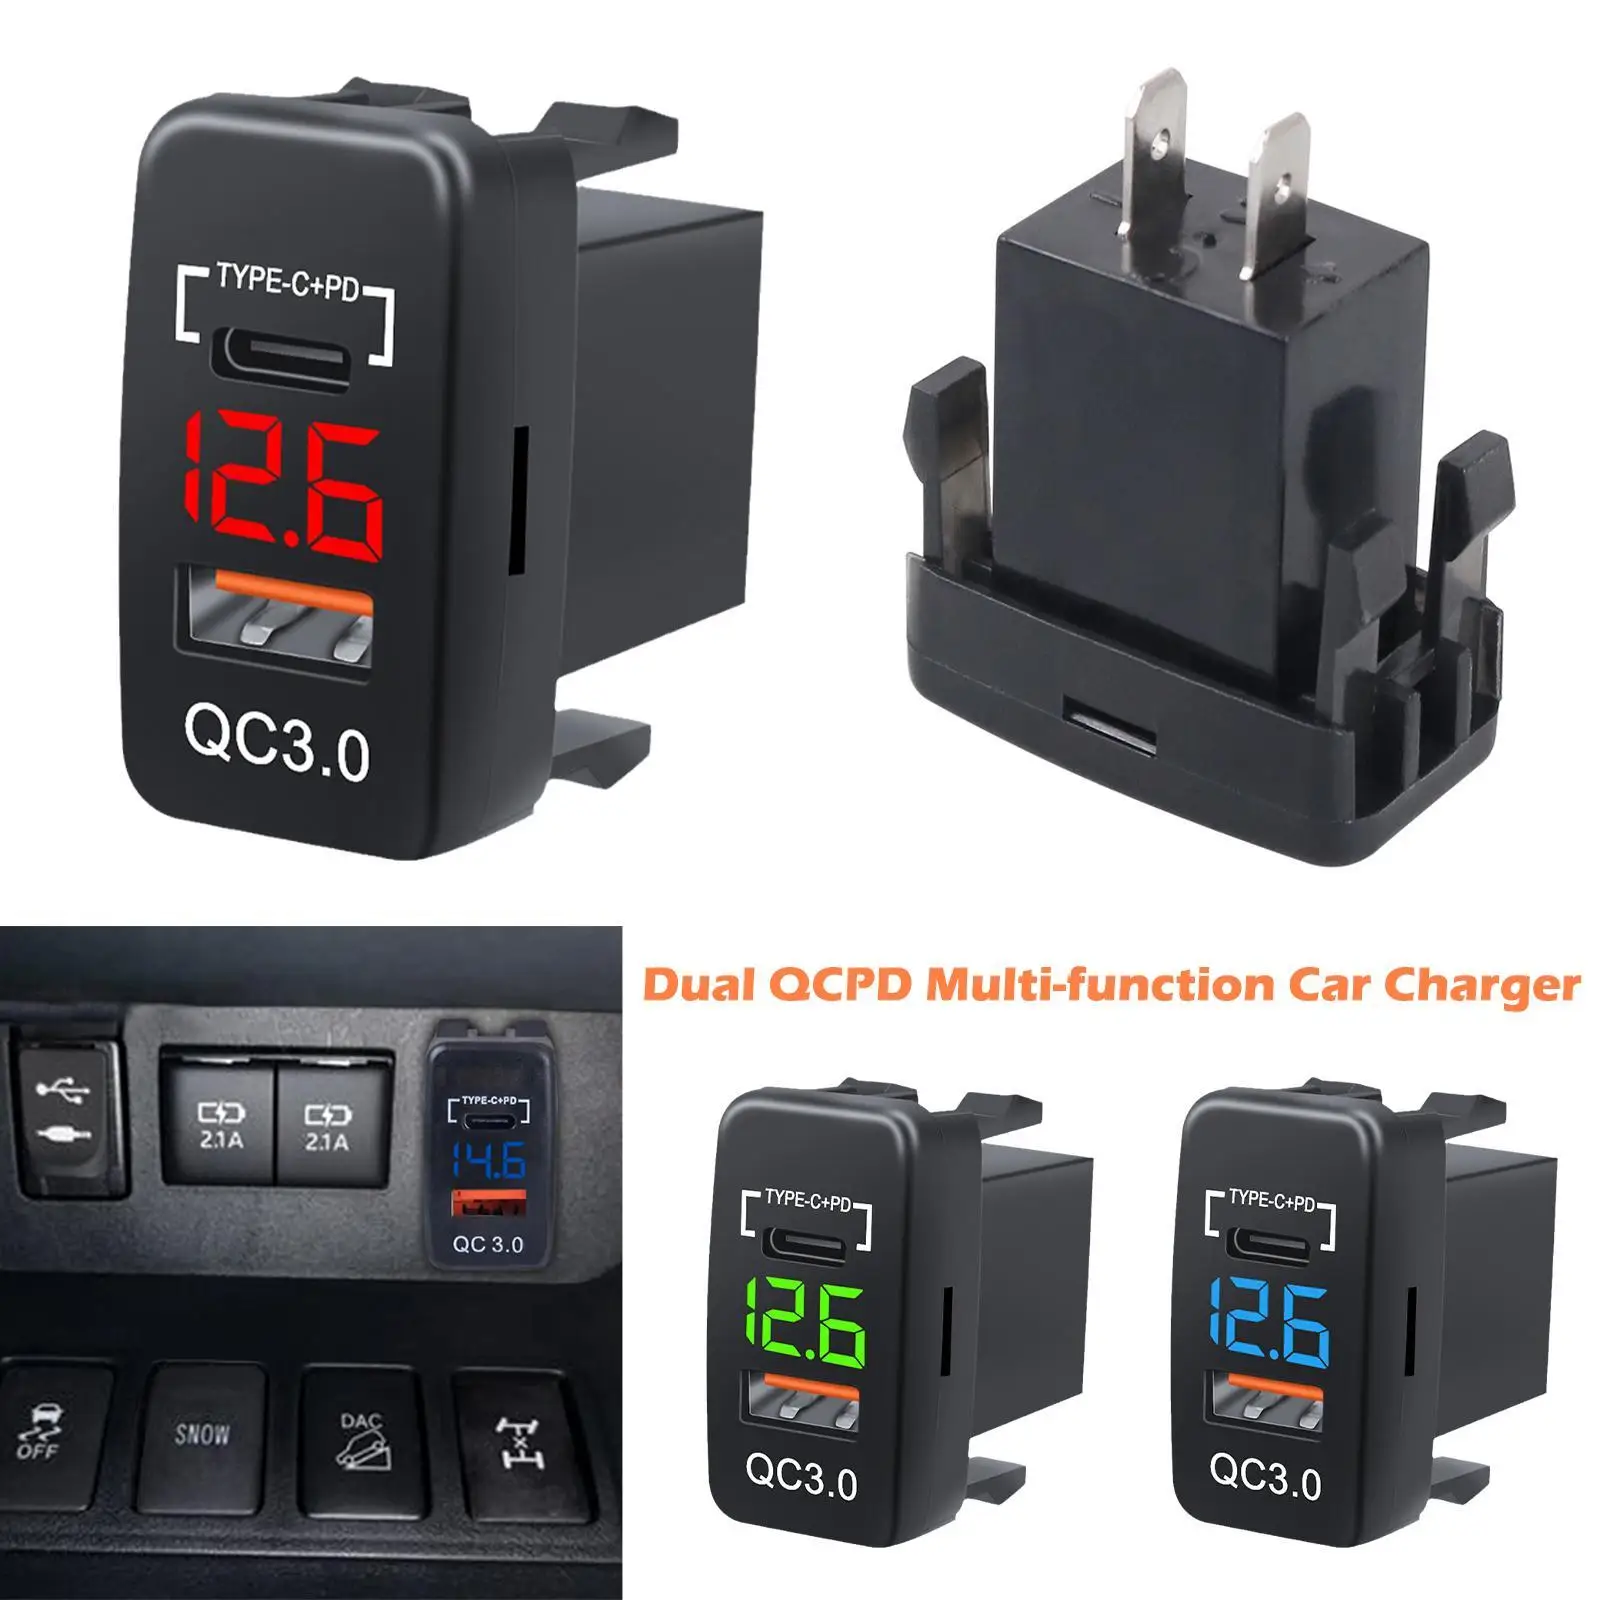 

Car QC3.0 Type C PD with LED Voltmeter Outlet Waterproof Charger Adapter USB Charging Port for Car Marine